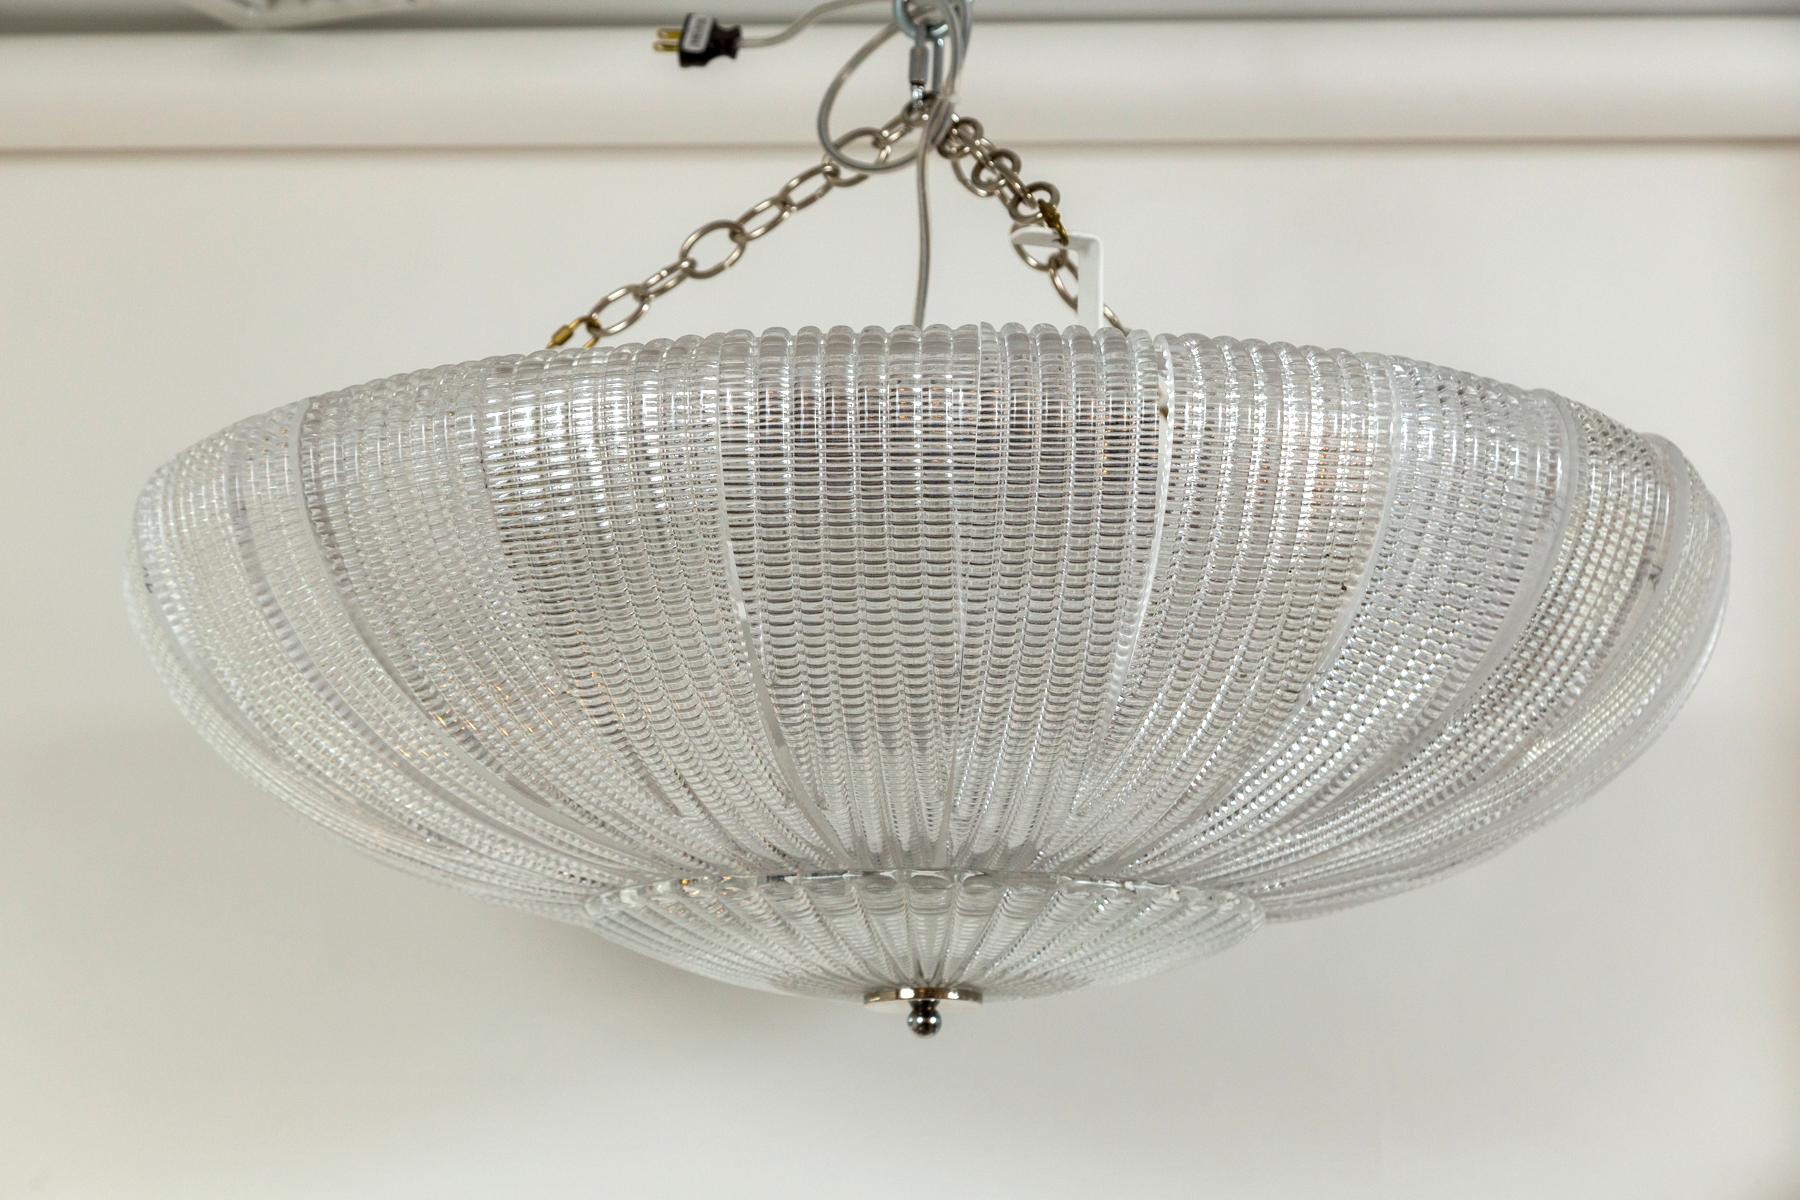 26 curved  waffle textured blown glass compose this sleek round near flushmount ceiling fixture finishing with a circuar plate and nickel polished finial.   Electrified to code with 6 medium base sockets for even illumination and a beautiful